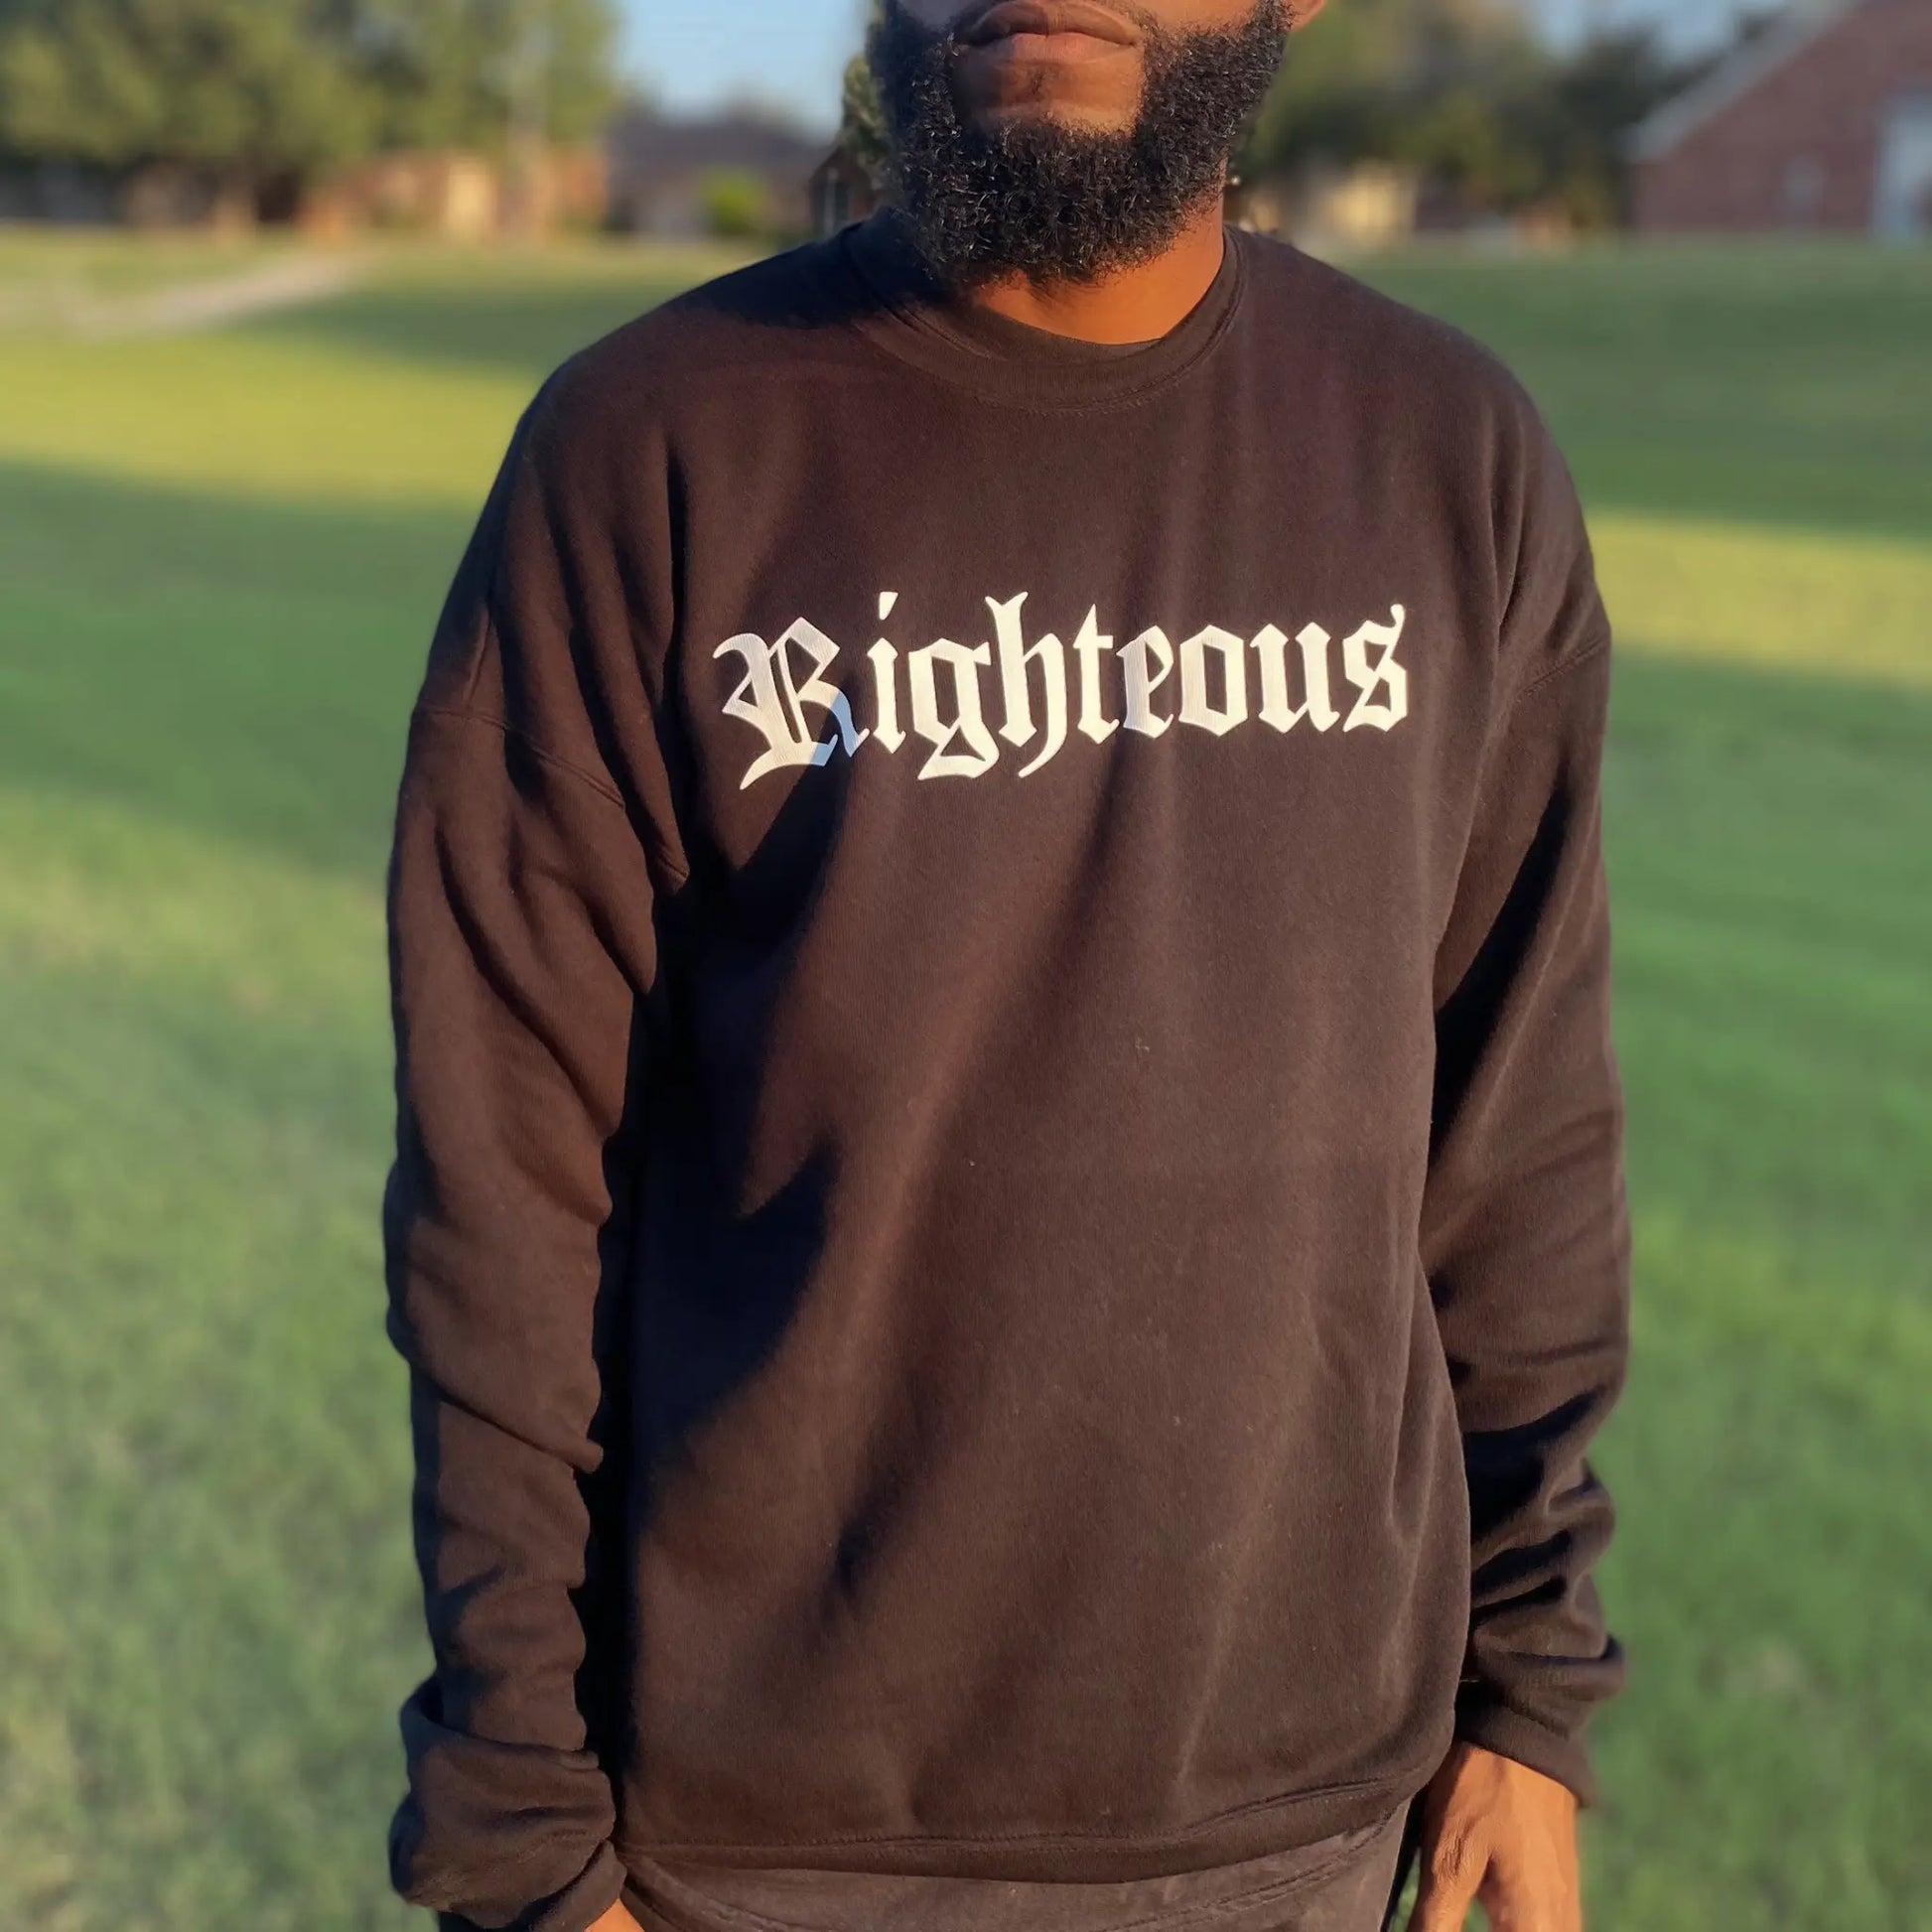 Black crew neck sweatshirt. Righteous written in bold white letters on the front of the black sweatshirt. Black sweatshirt, christian clothing, faith based apparel Righteous sweatshirt. Jesus inspired clothing. Oversized sweatshirt. loungewear. streetwear. Christian streetwear. Christian clothing brand